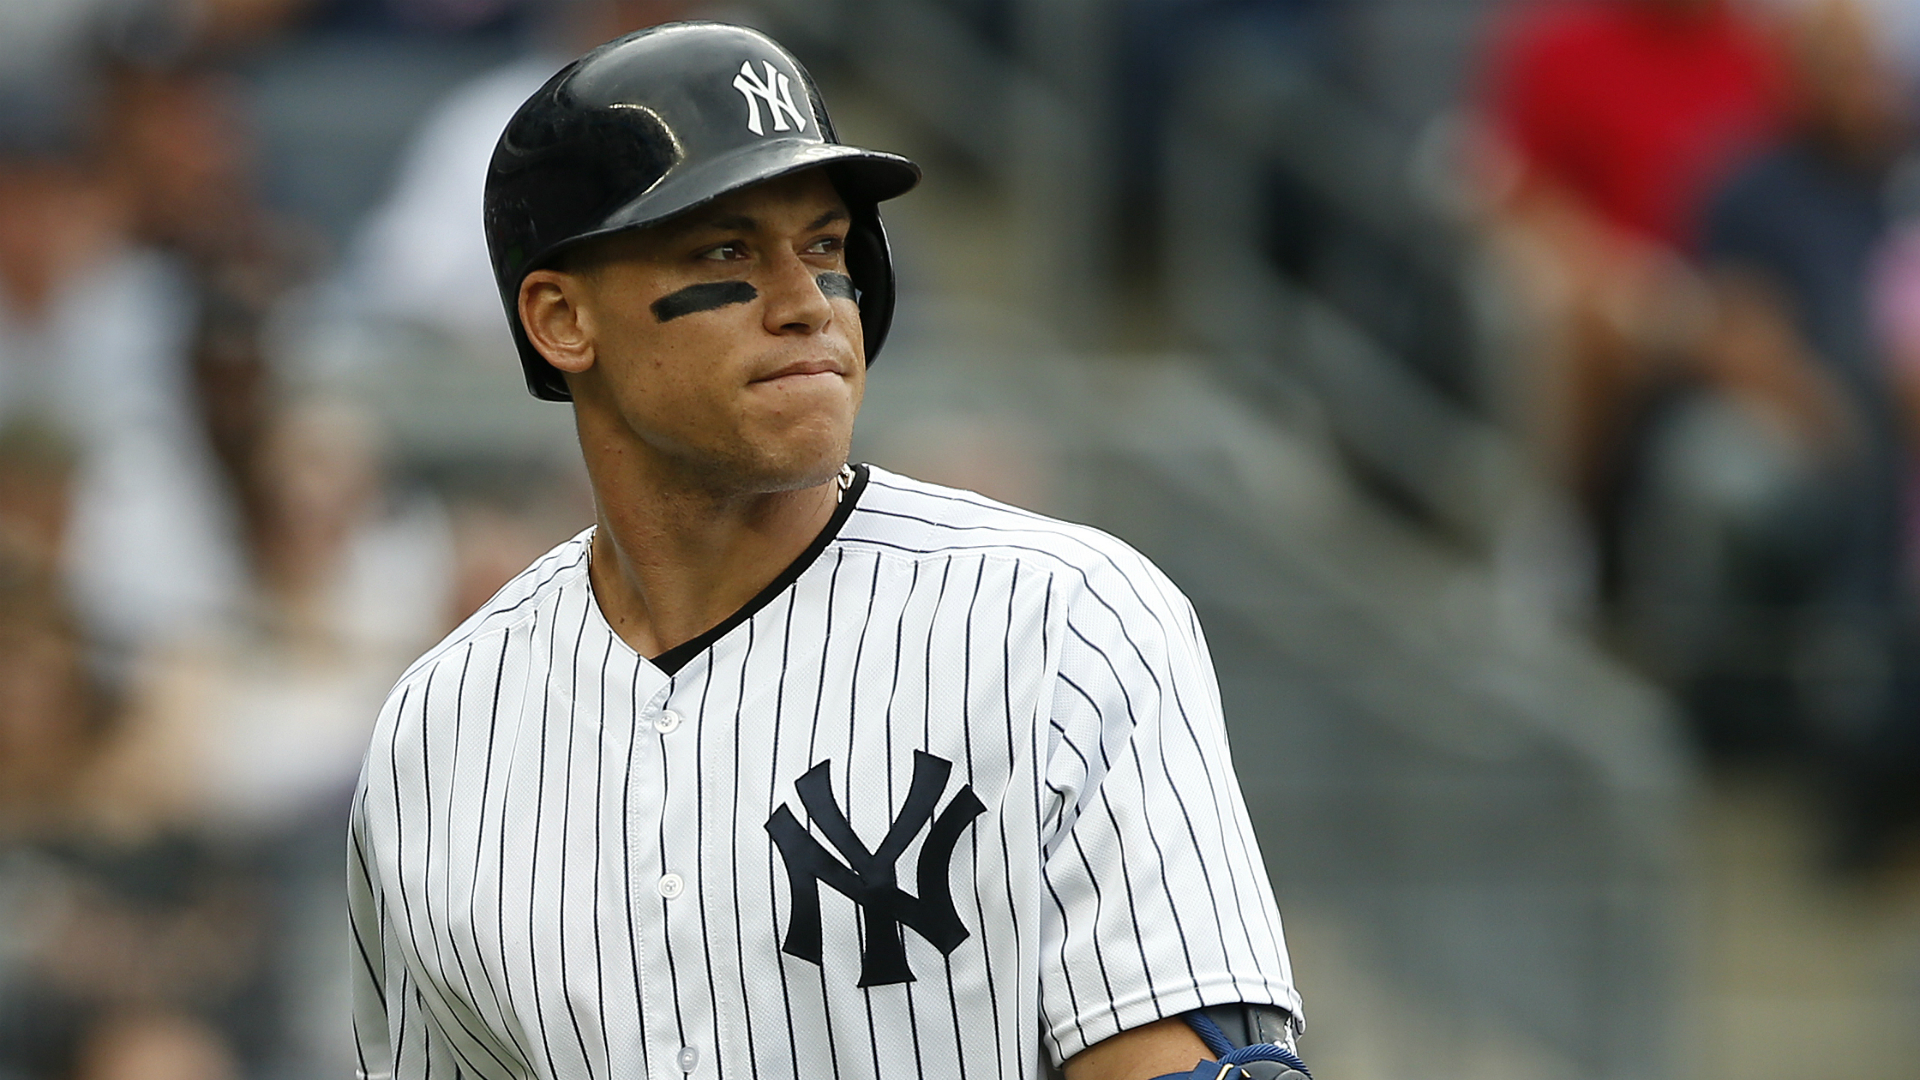 Aaron Judge knows he won’t be 100% recovered from his strained left oblique when he finally returns to the Yankees' lineup.